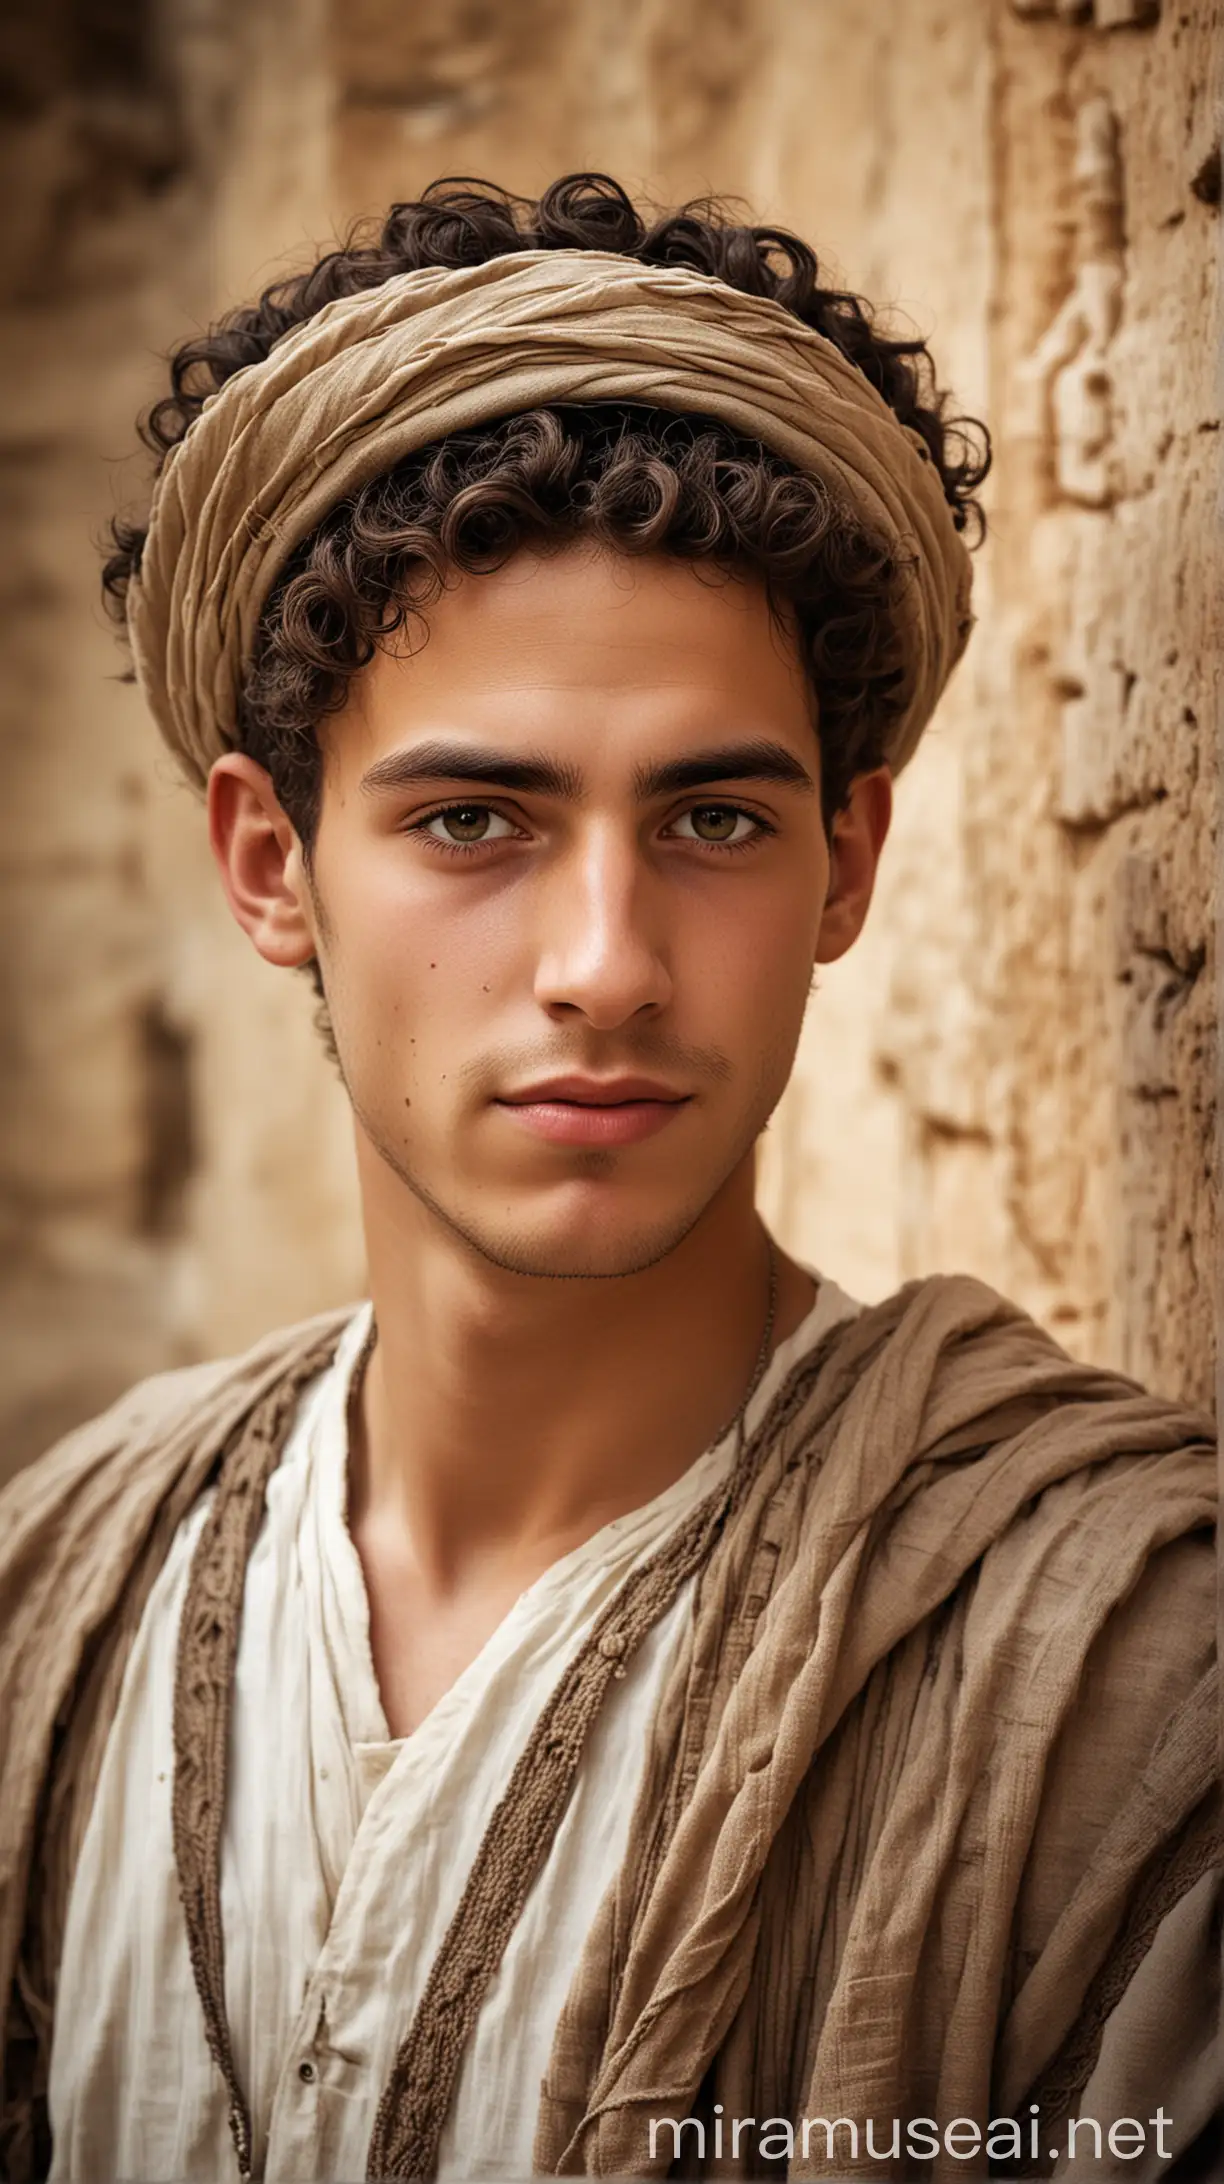 Young Jewish man in ancient world 